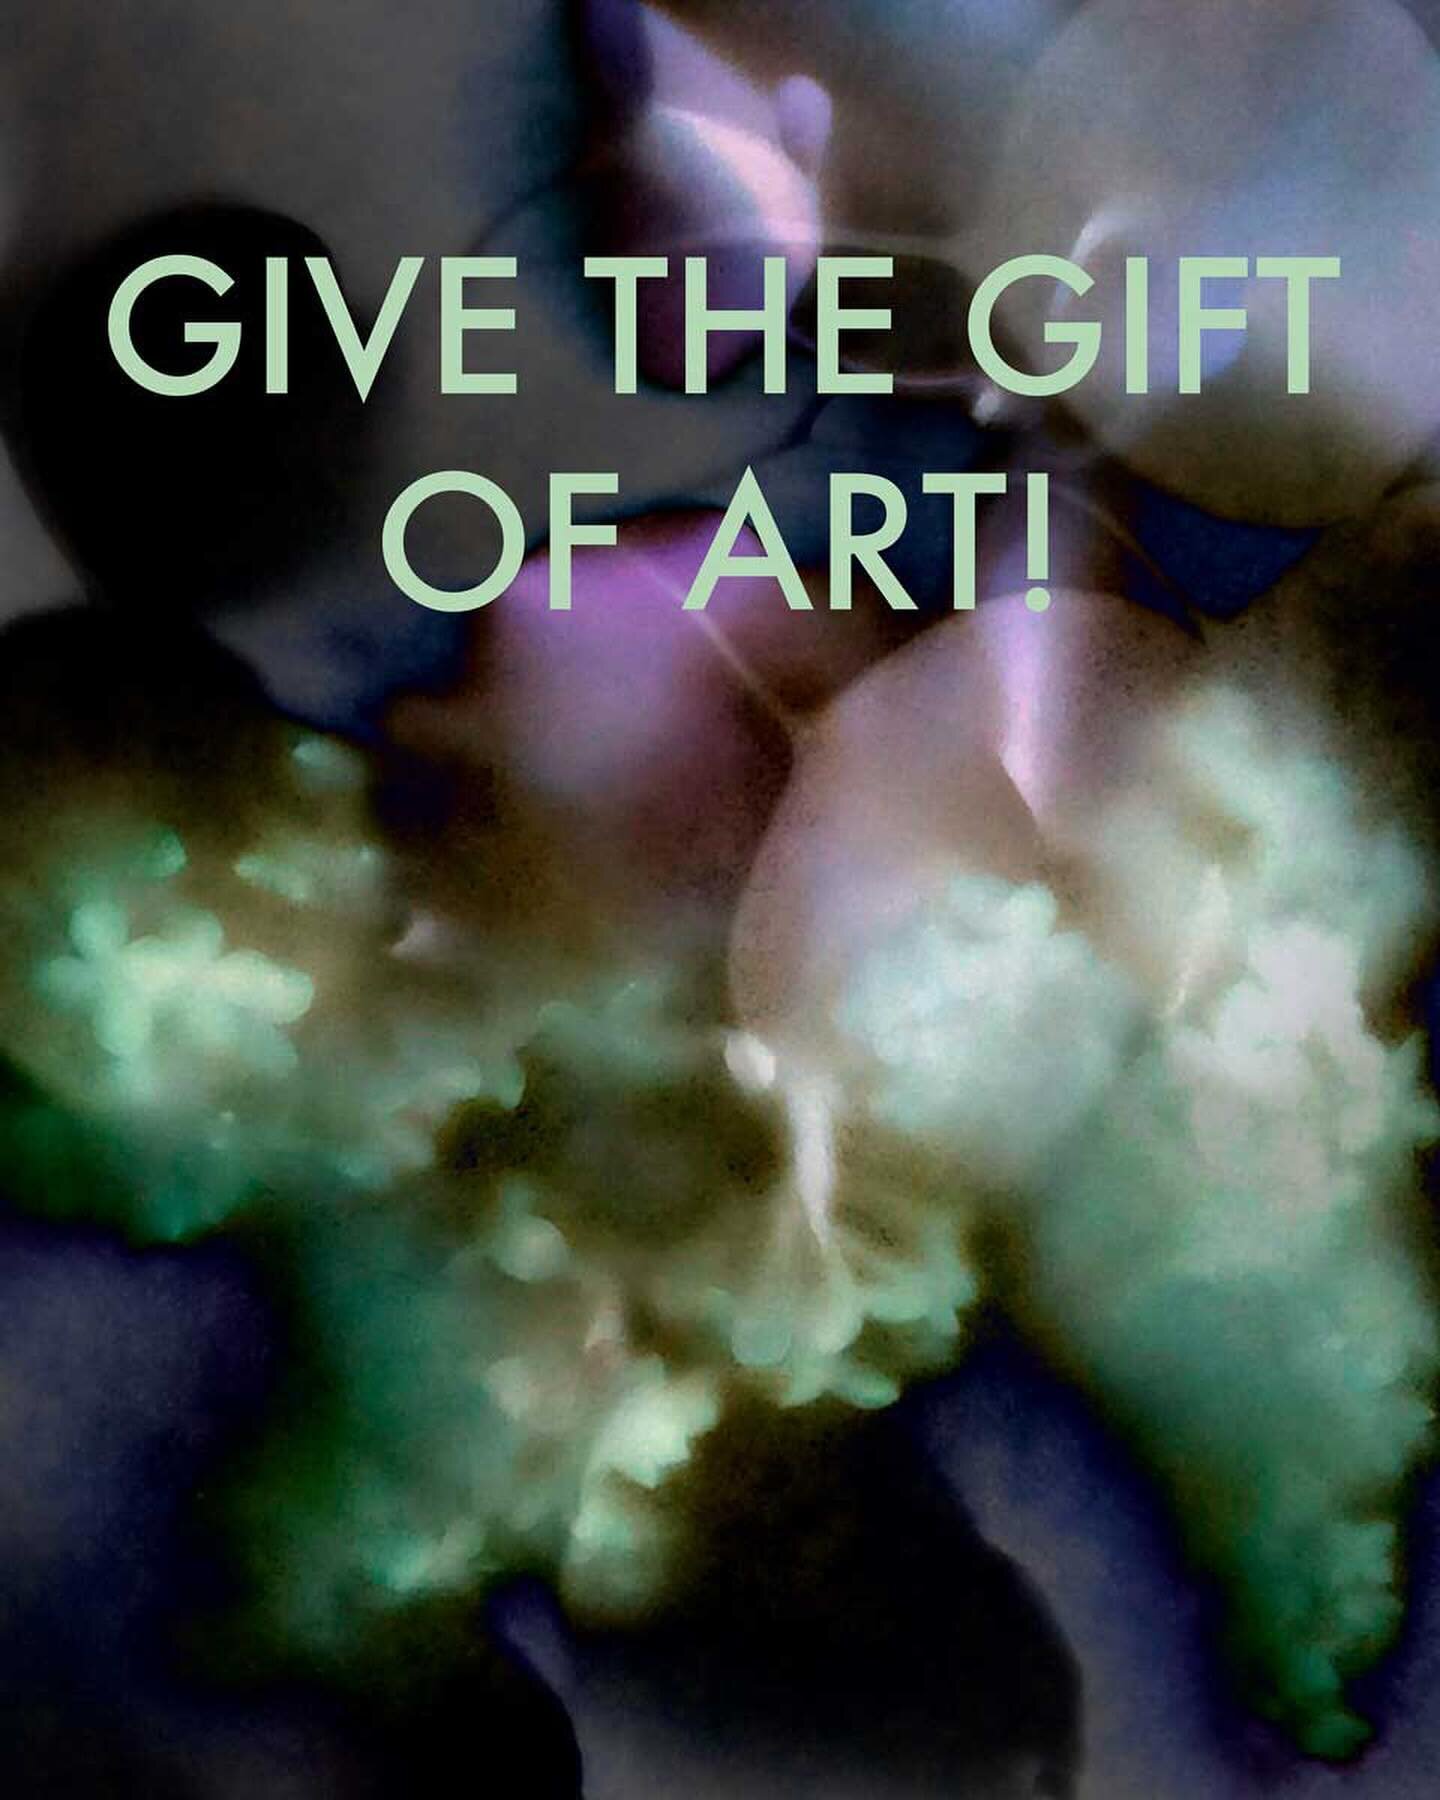 Wow! It&rsquo;s time for holiday gift giving again. 🎁 Choosing art for someone as a gift can be tricky-it&rsquo;s a very personal decision. But giving a gift card can solve all that! 🤗

GIVE THE GIFT OF ART from my online studio shop by purchasing 